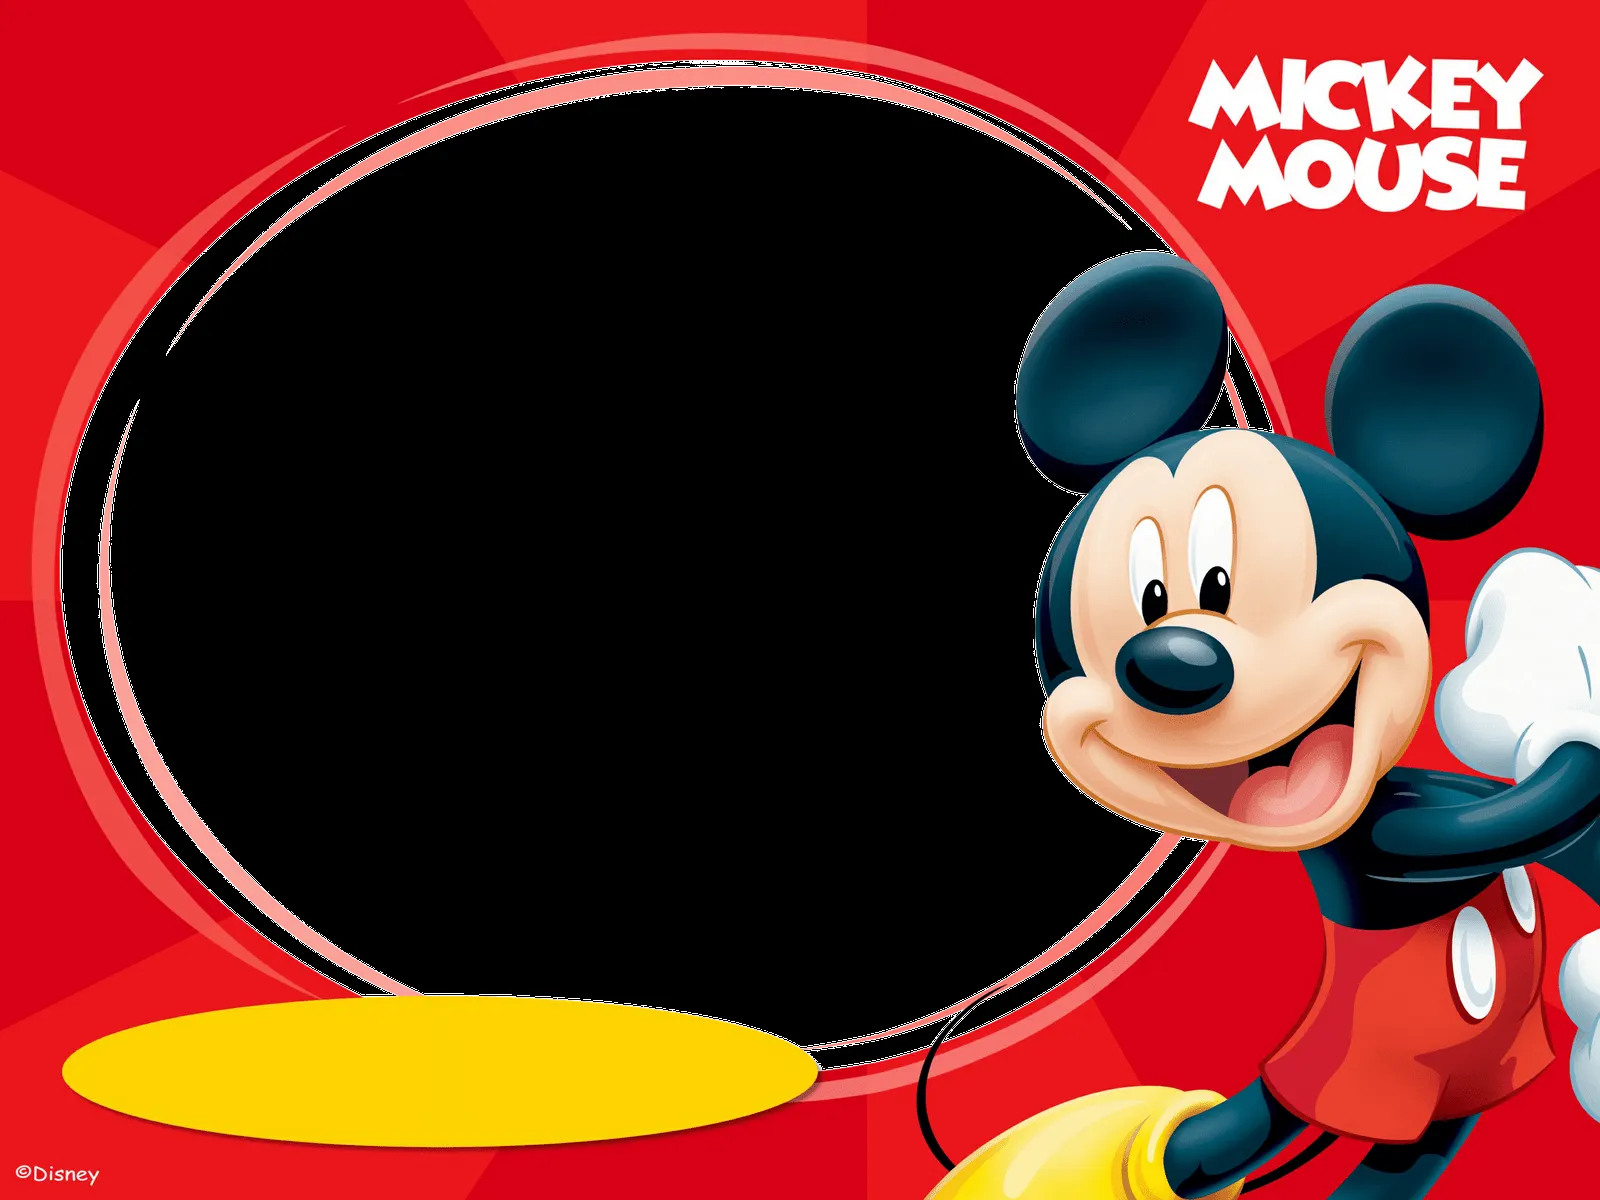 Marcos Mickey Mouse bebé png - Imagui